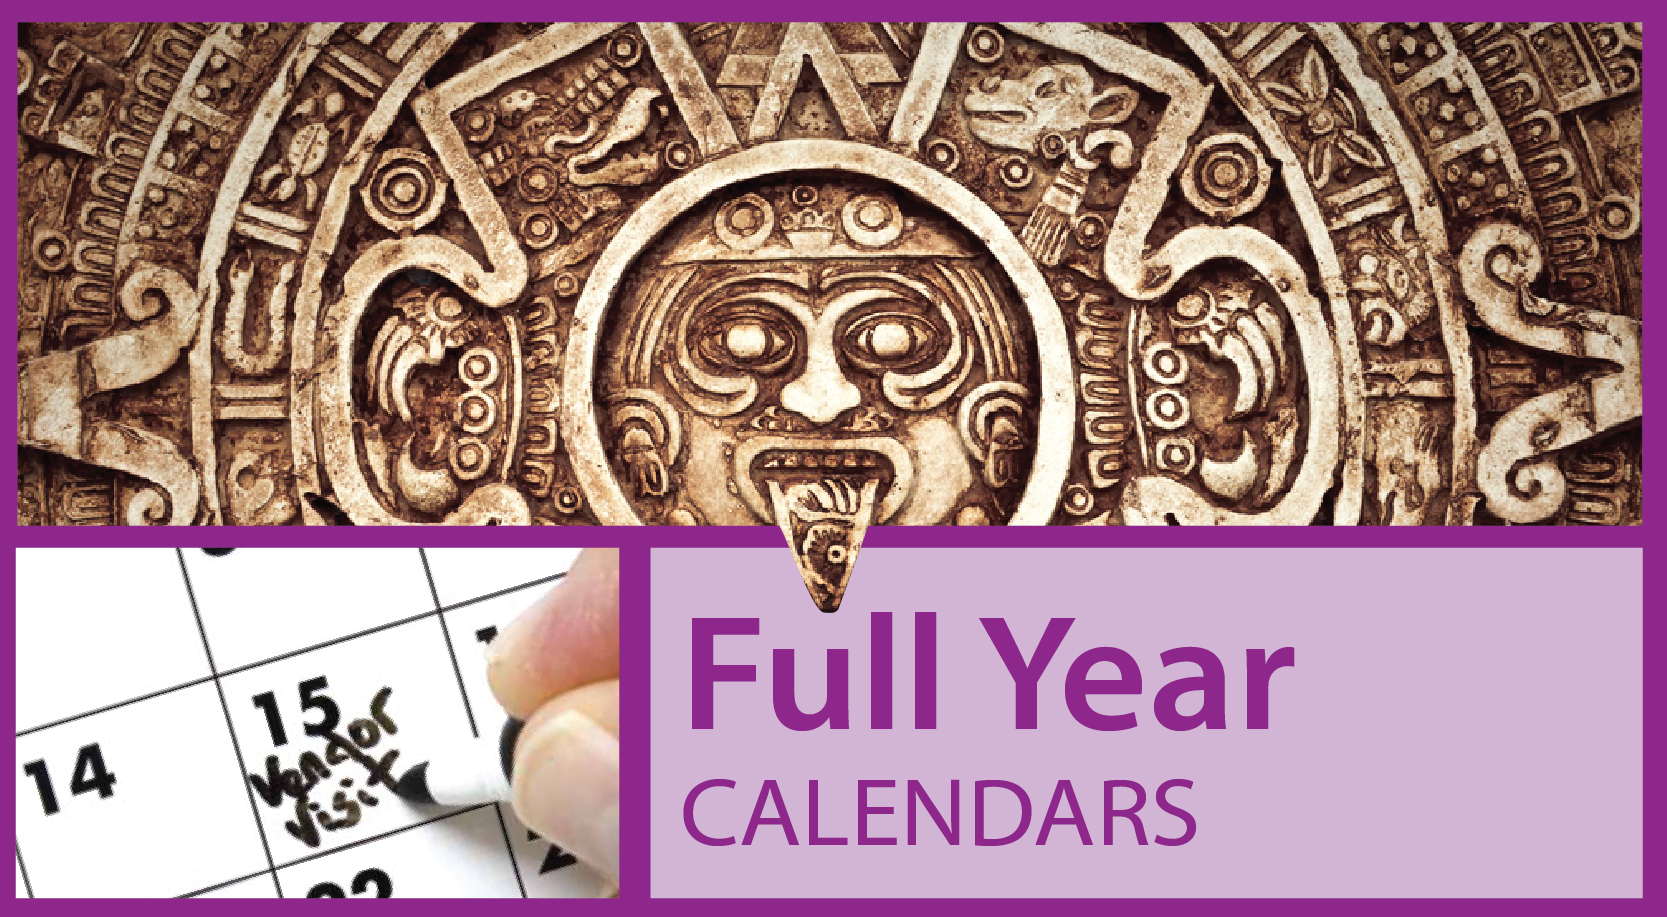 Commercial Full Year View Calendars | Full Year Printed Calendar for Businesses